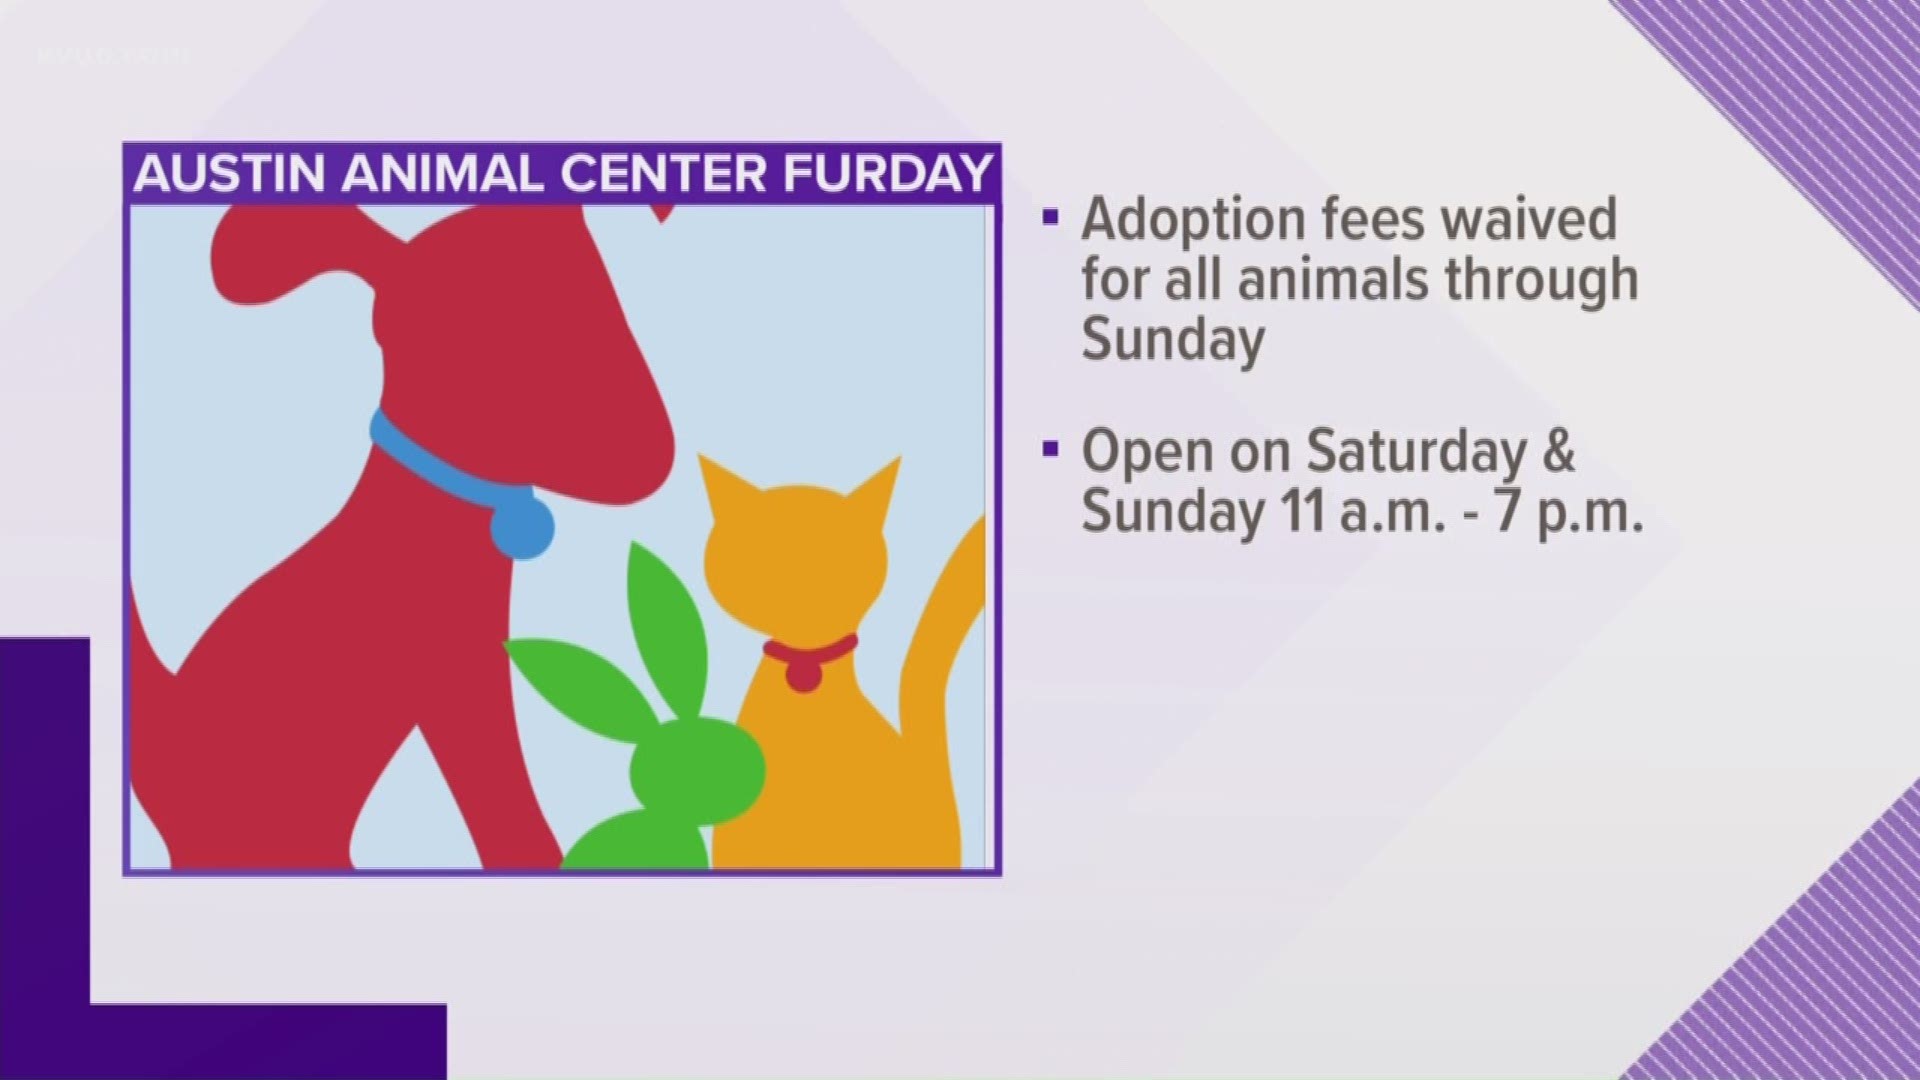 The Austin Animal Center is waving adoption fees through the weekend for its Black FURiday adoption event.